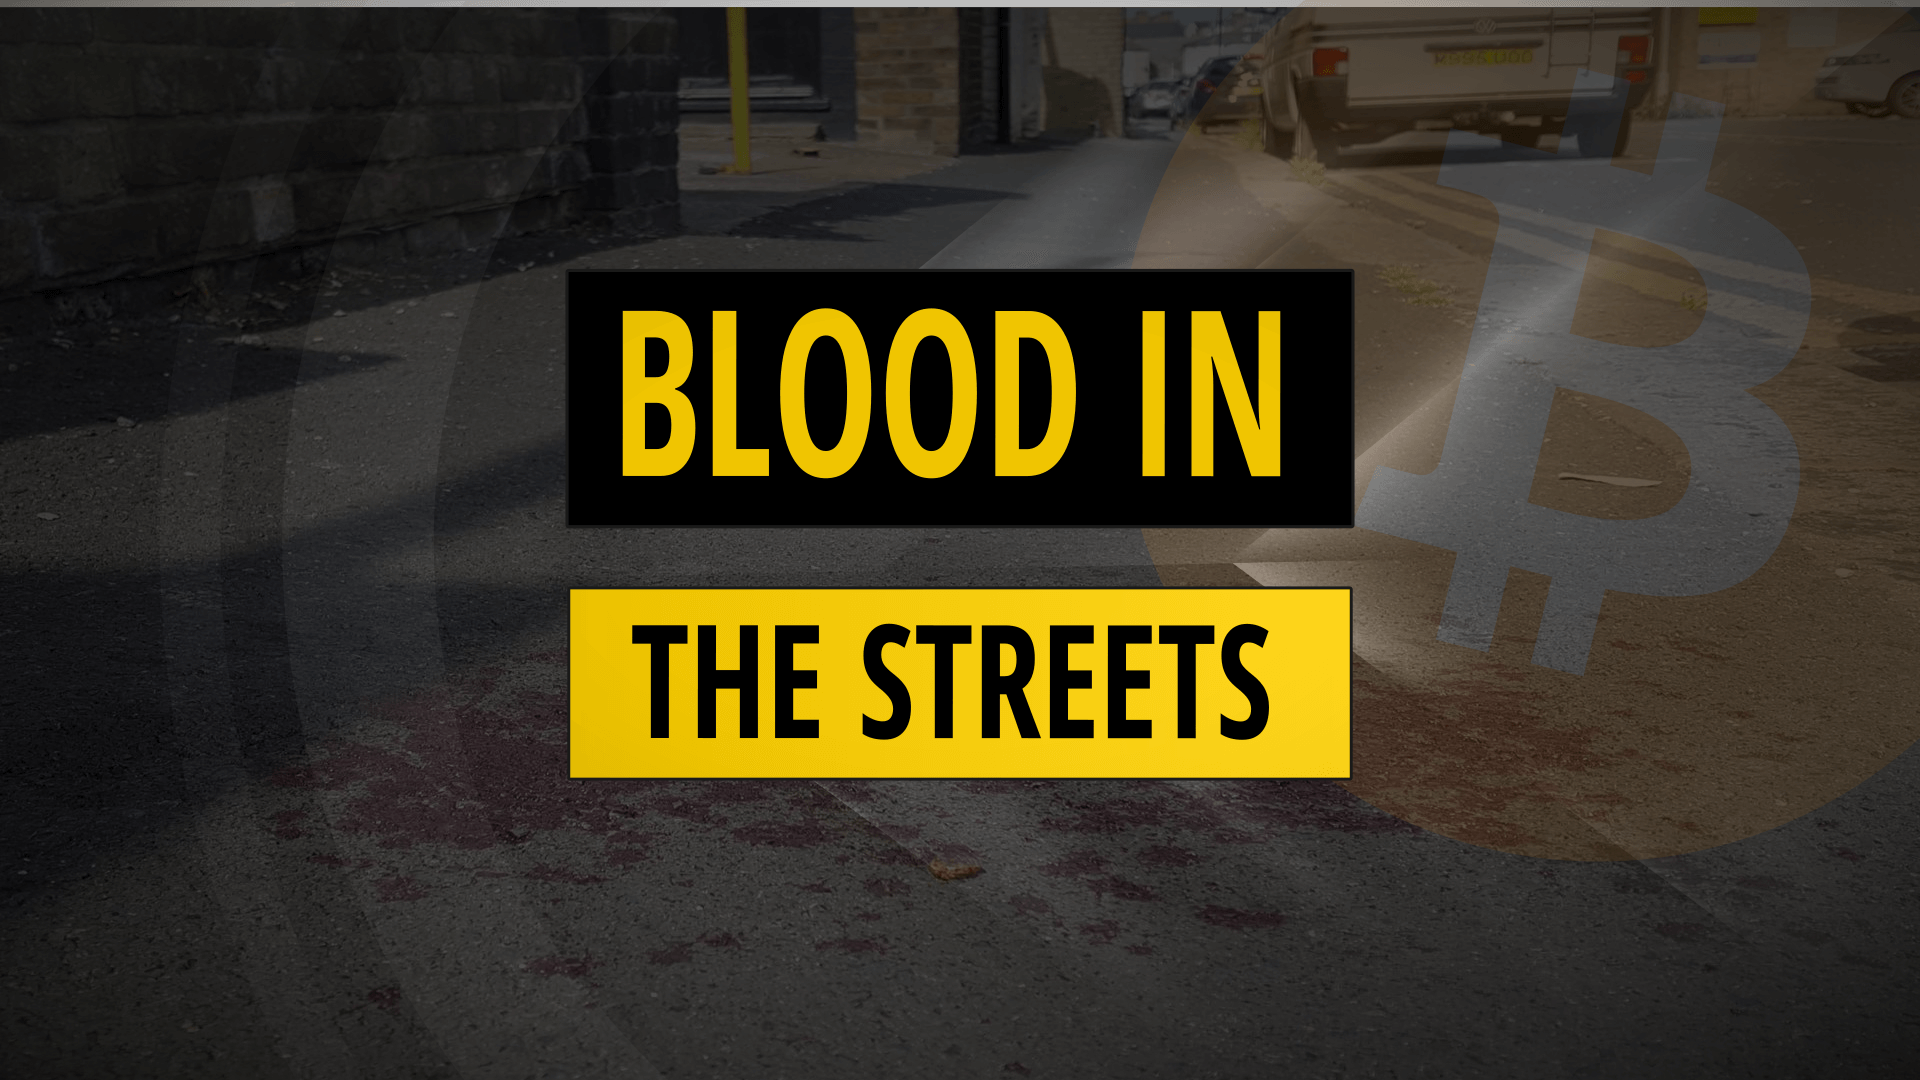 Blood in the streets